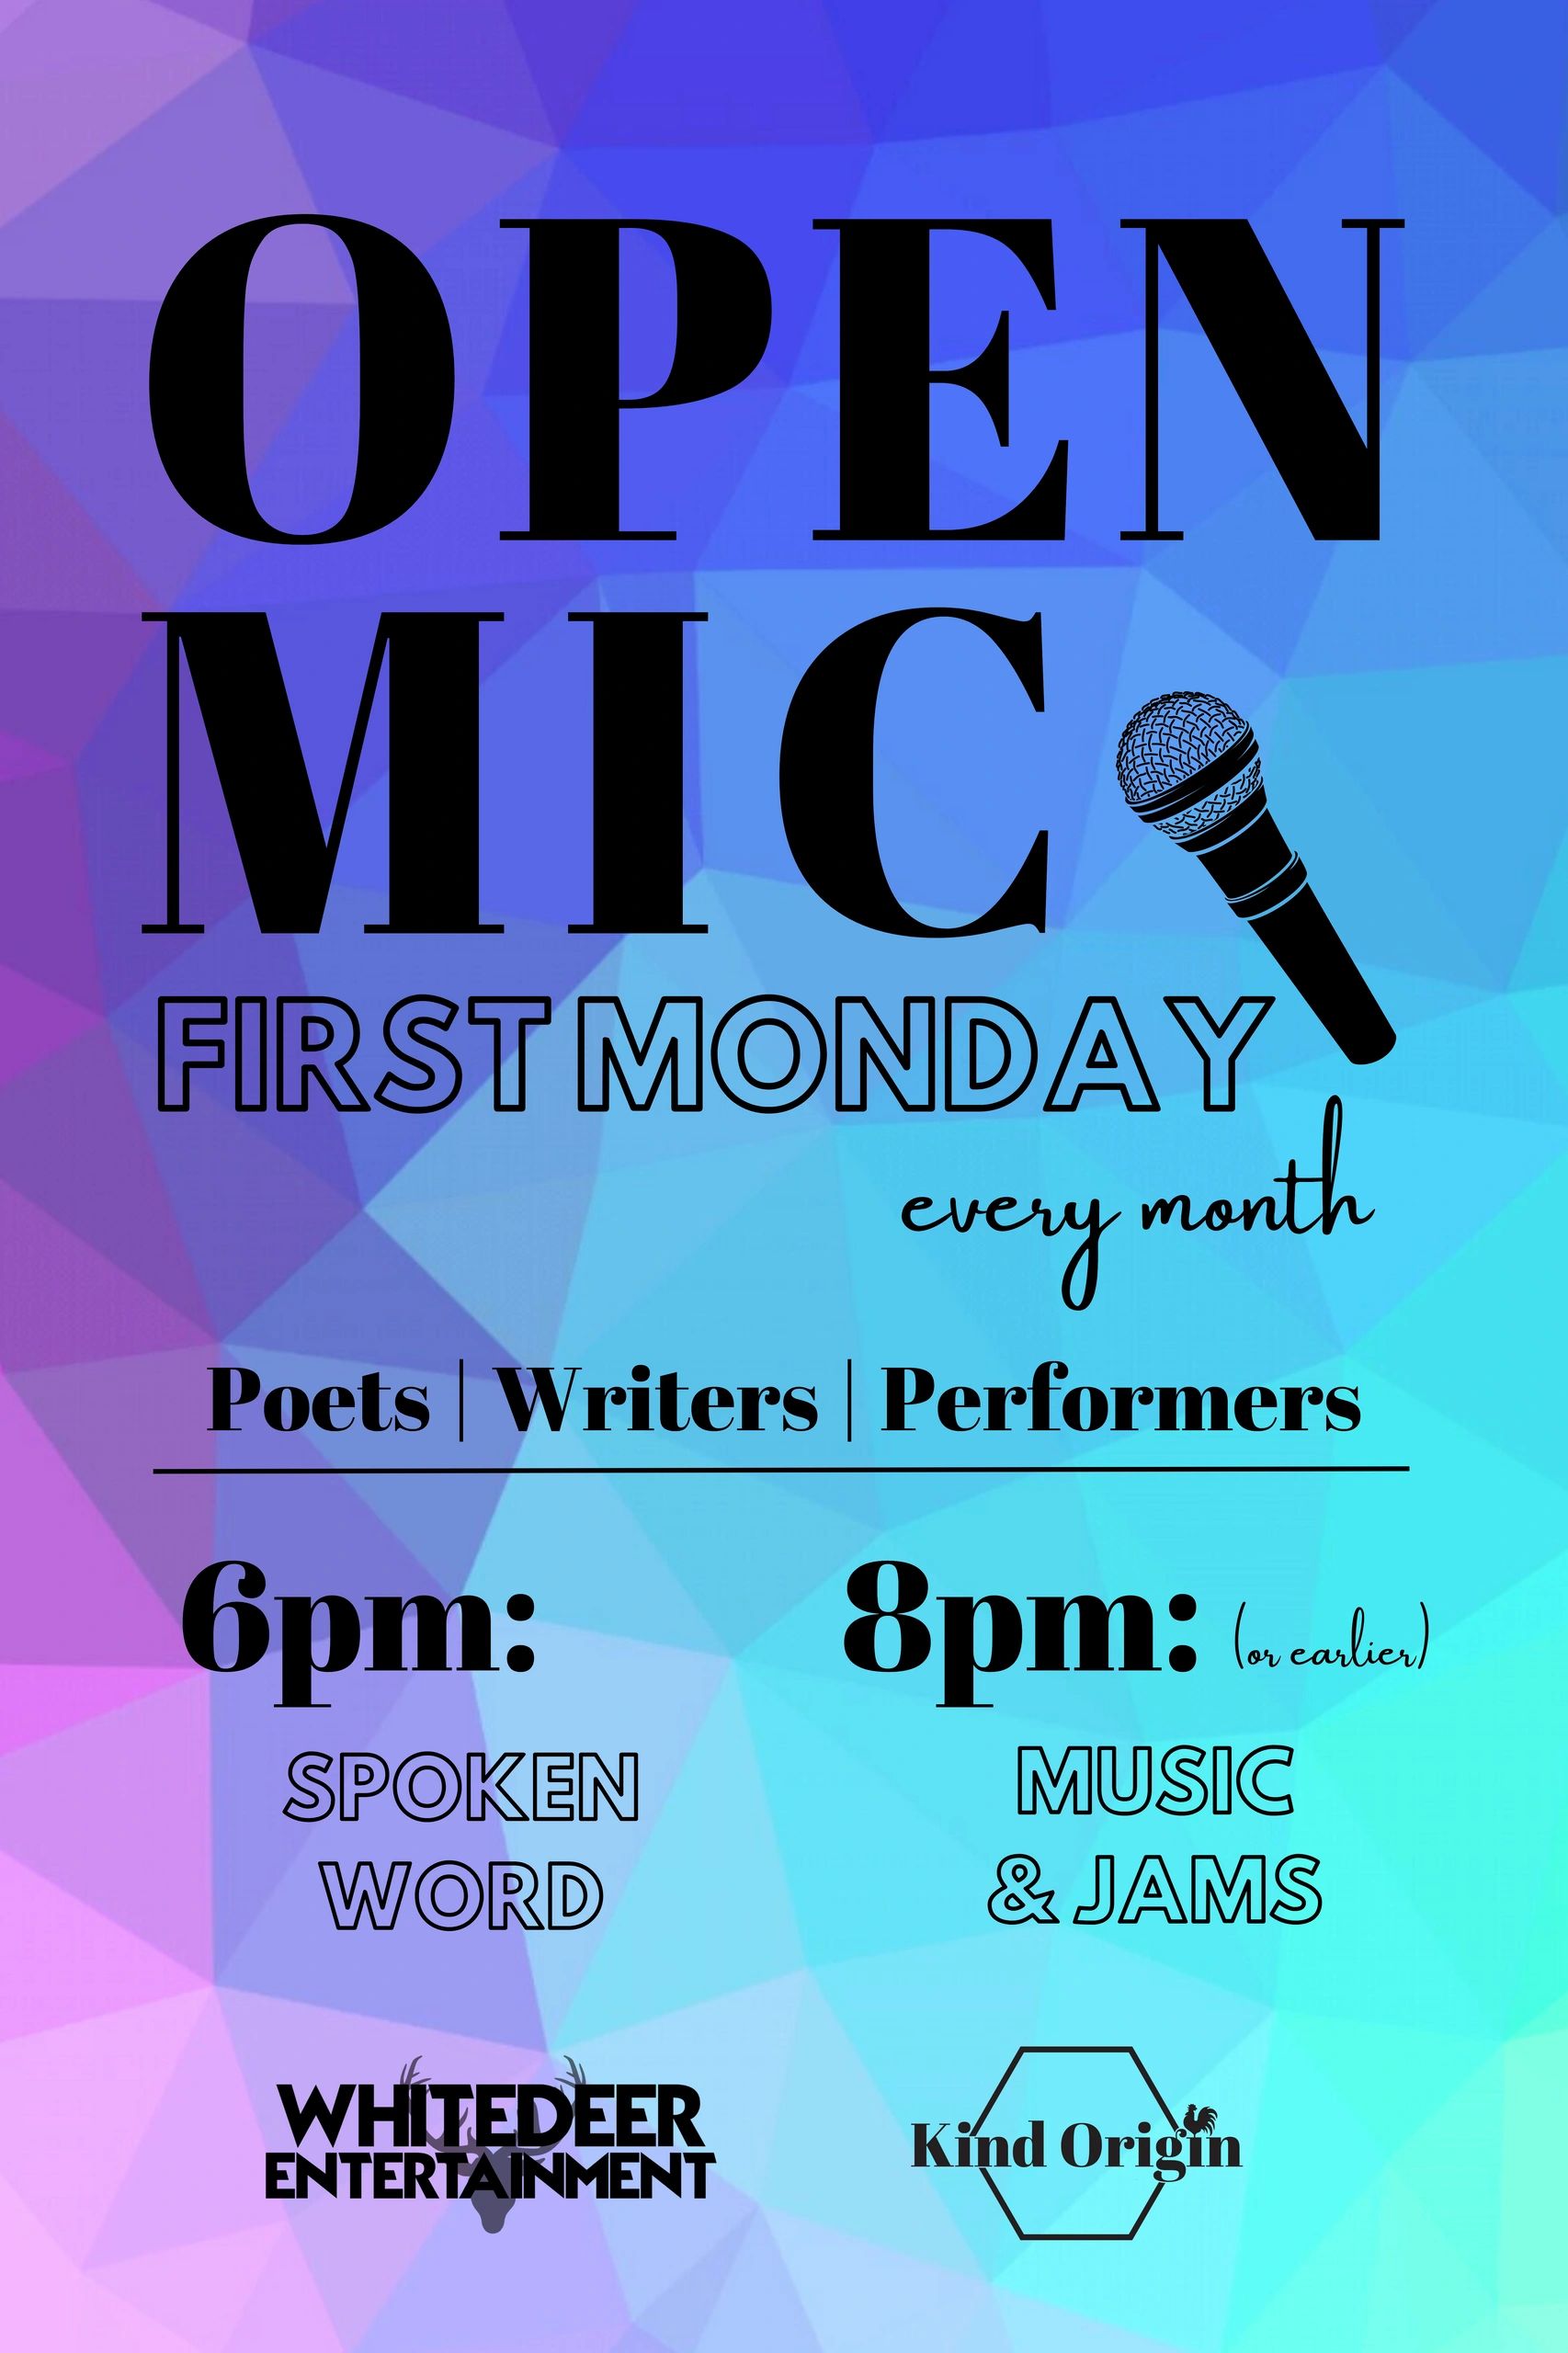 First Monday Open Mic